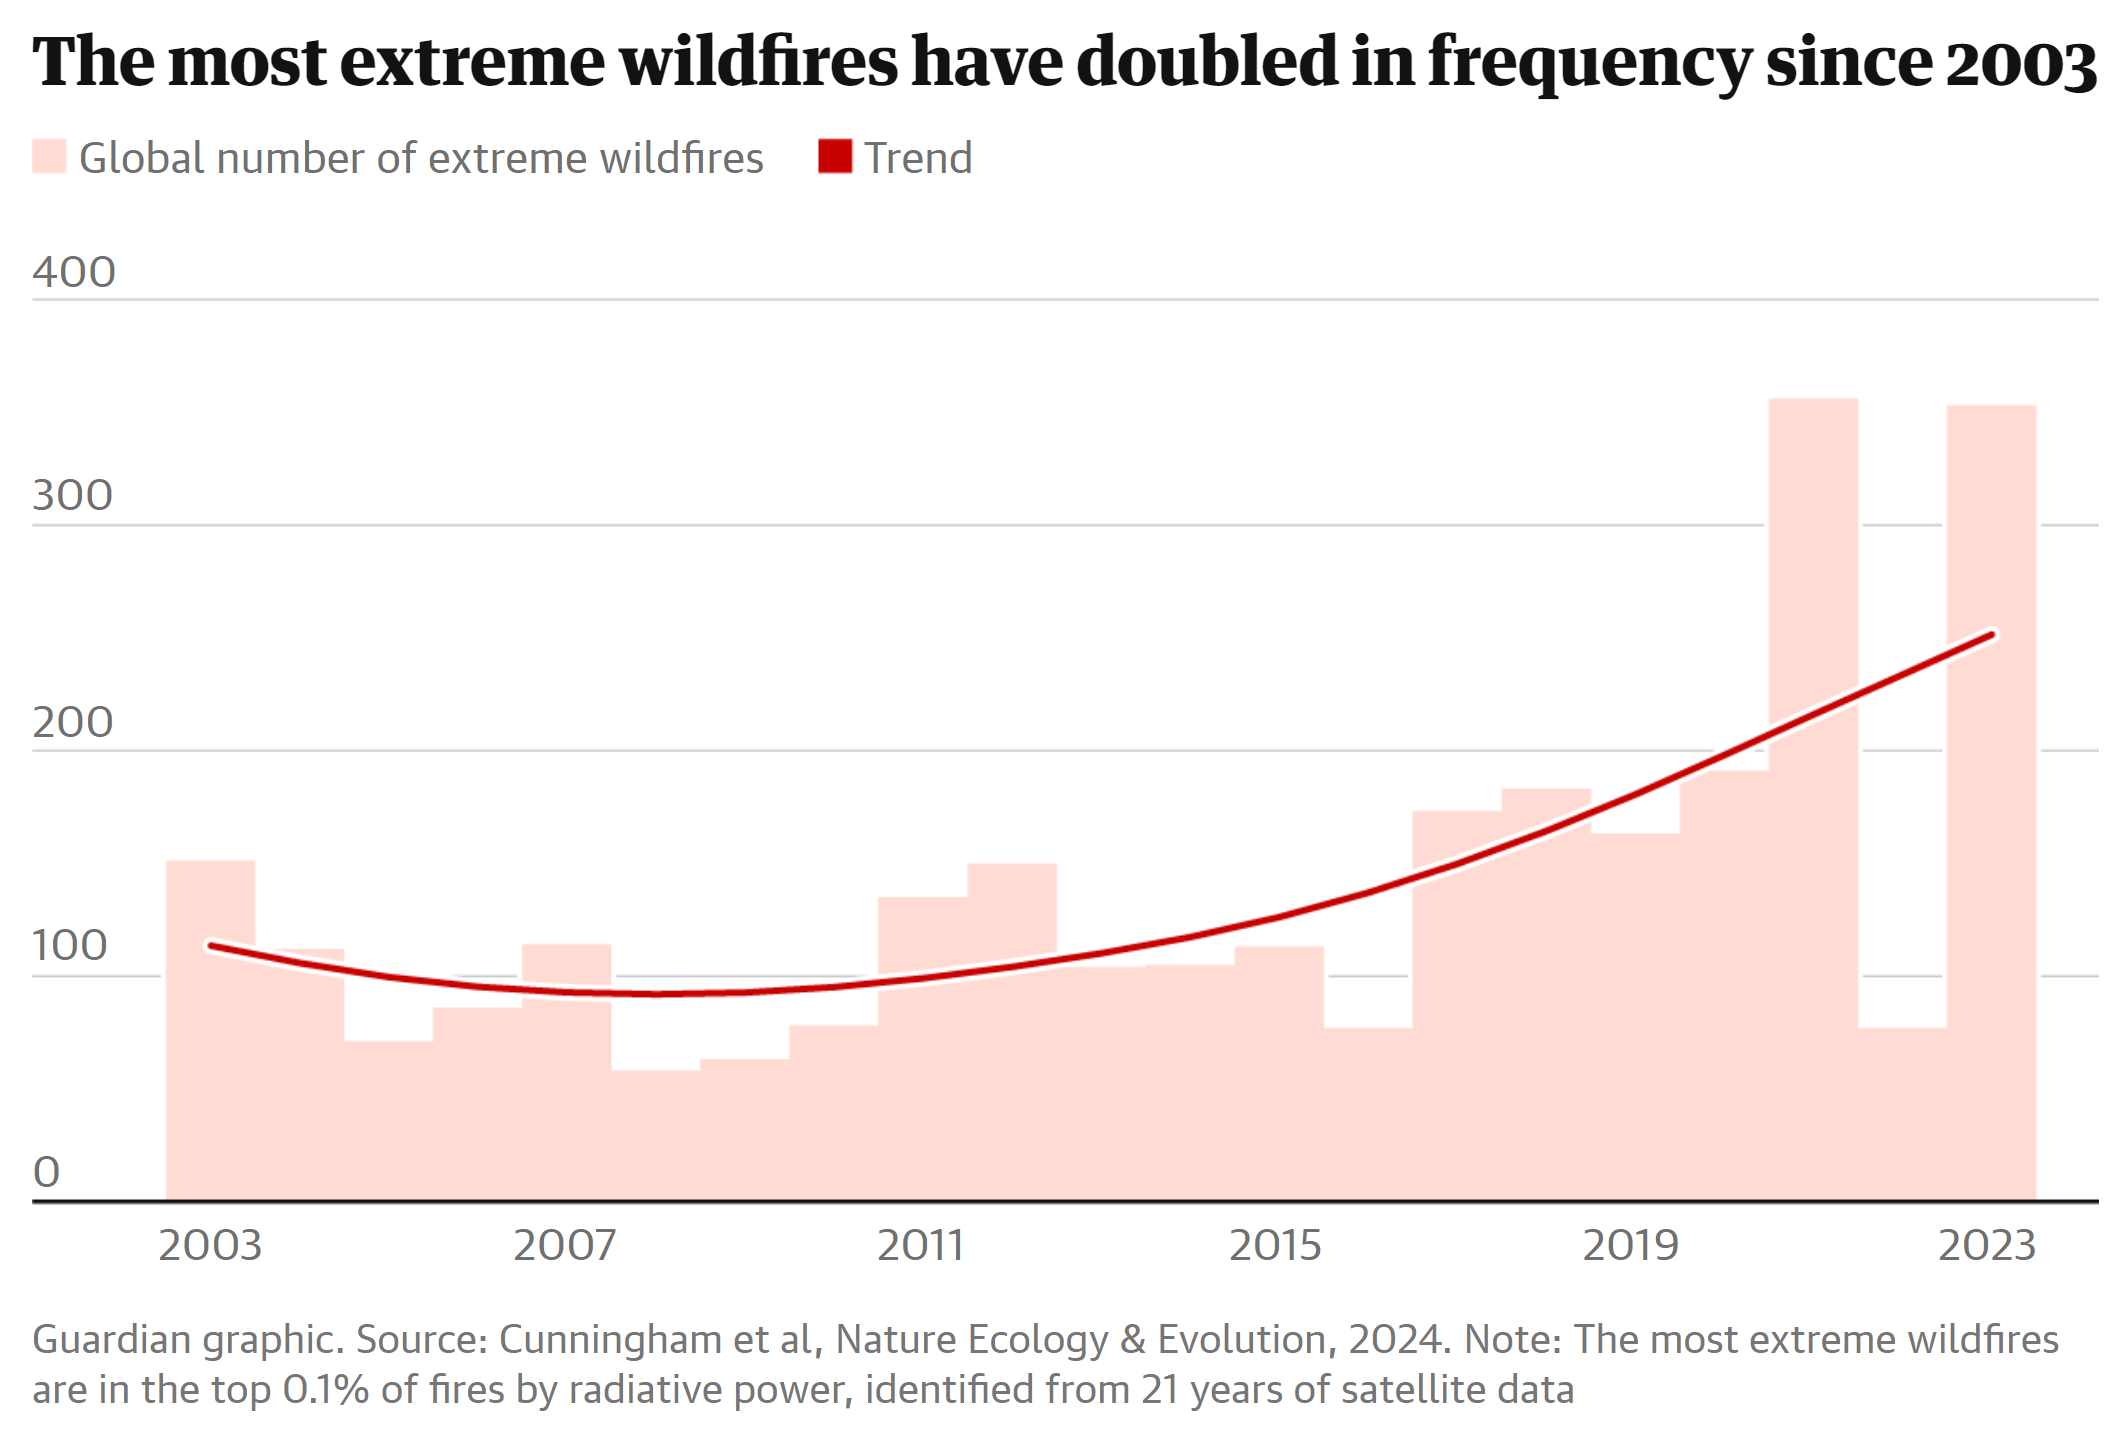 Global number of extreme wildfires, 2003-2023. The analysis of satellite data showed the number of extreme fires had risen by more than 10 times in the past 20 years in temperate conifer forests, such as in the western U.S. and Mediterranean. Data: Cunningham, et al., Nature Ecology & Evolution, 2024. The most extreme wildfires are in the top 0.1 percent of fires by radiative power, identified from 21 years of satellite data. Graphic: The Guardian